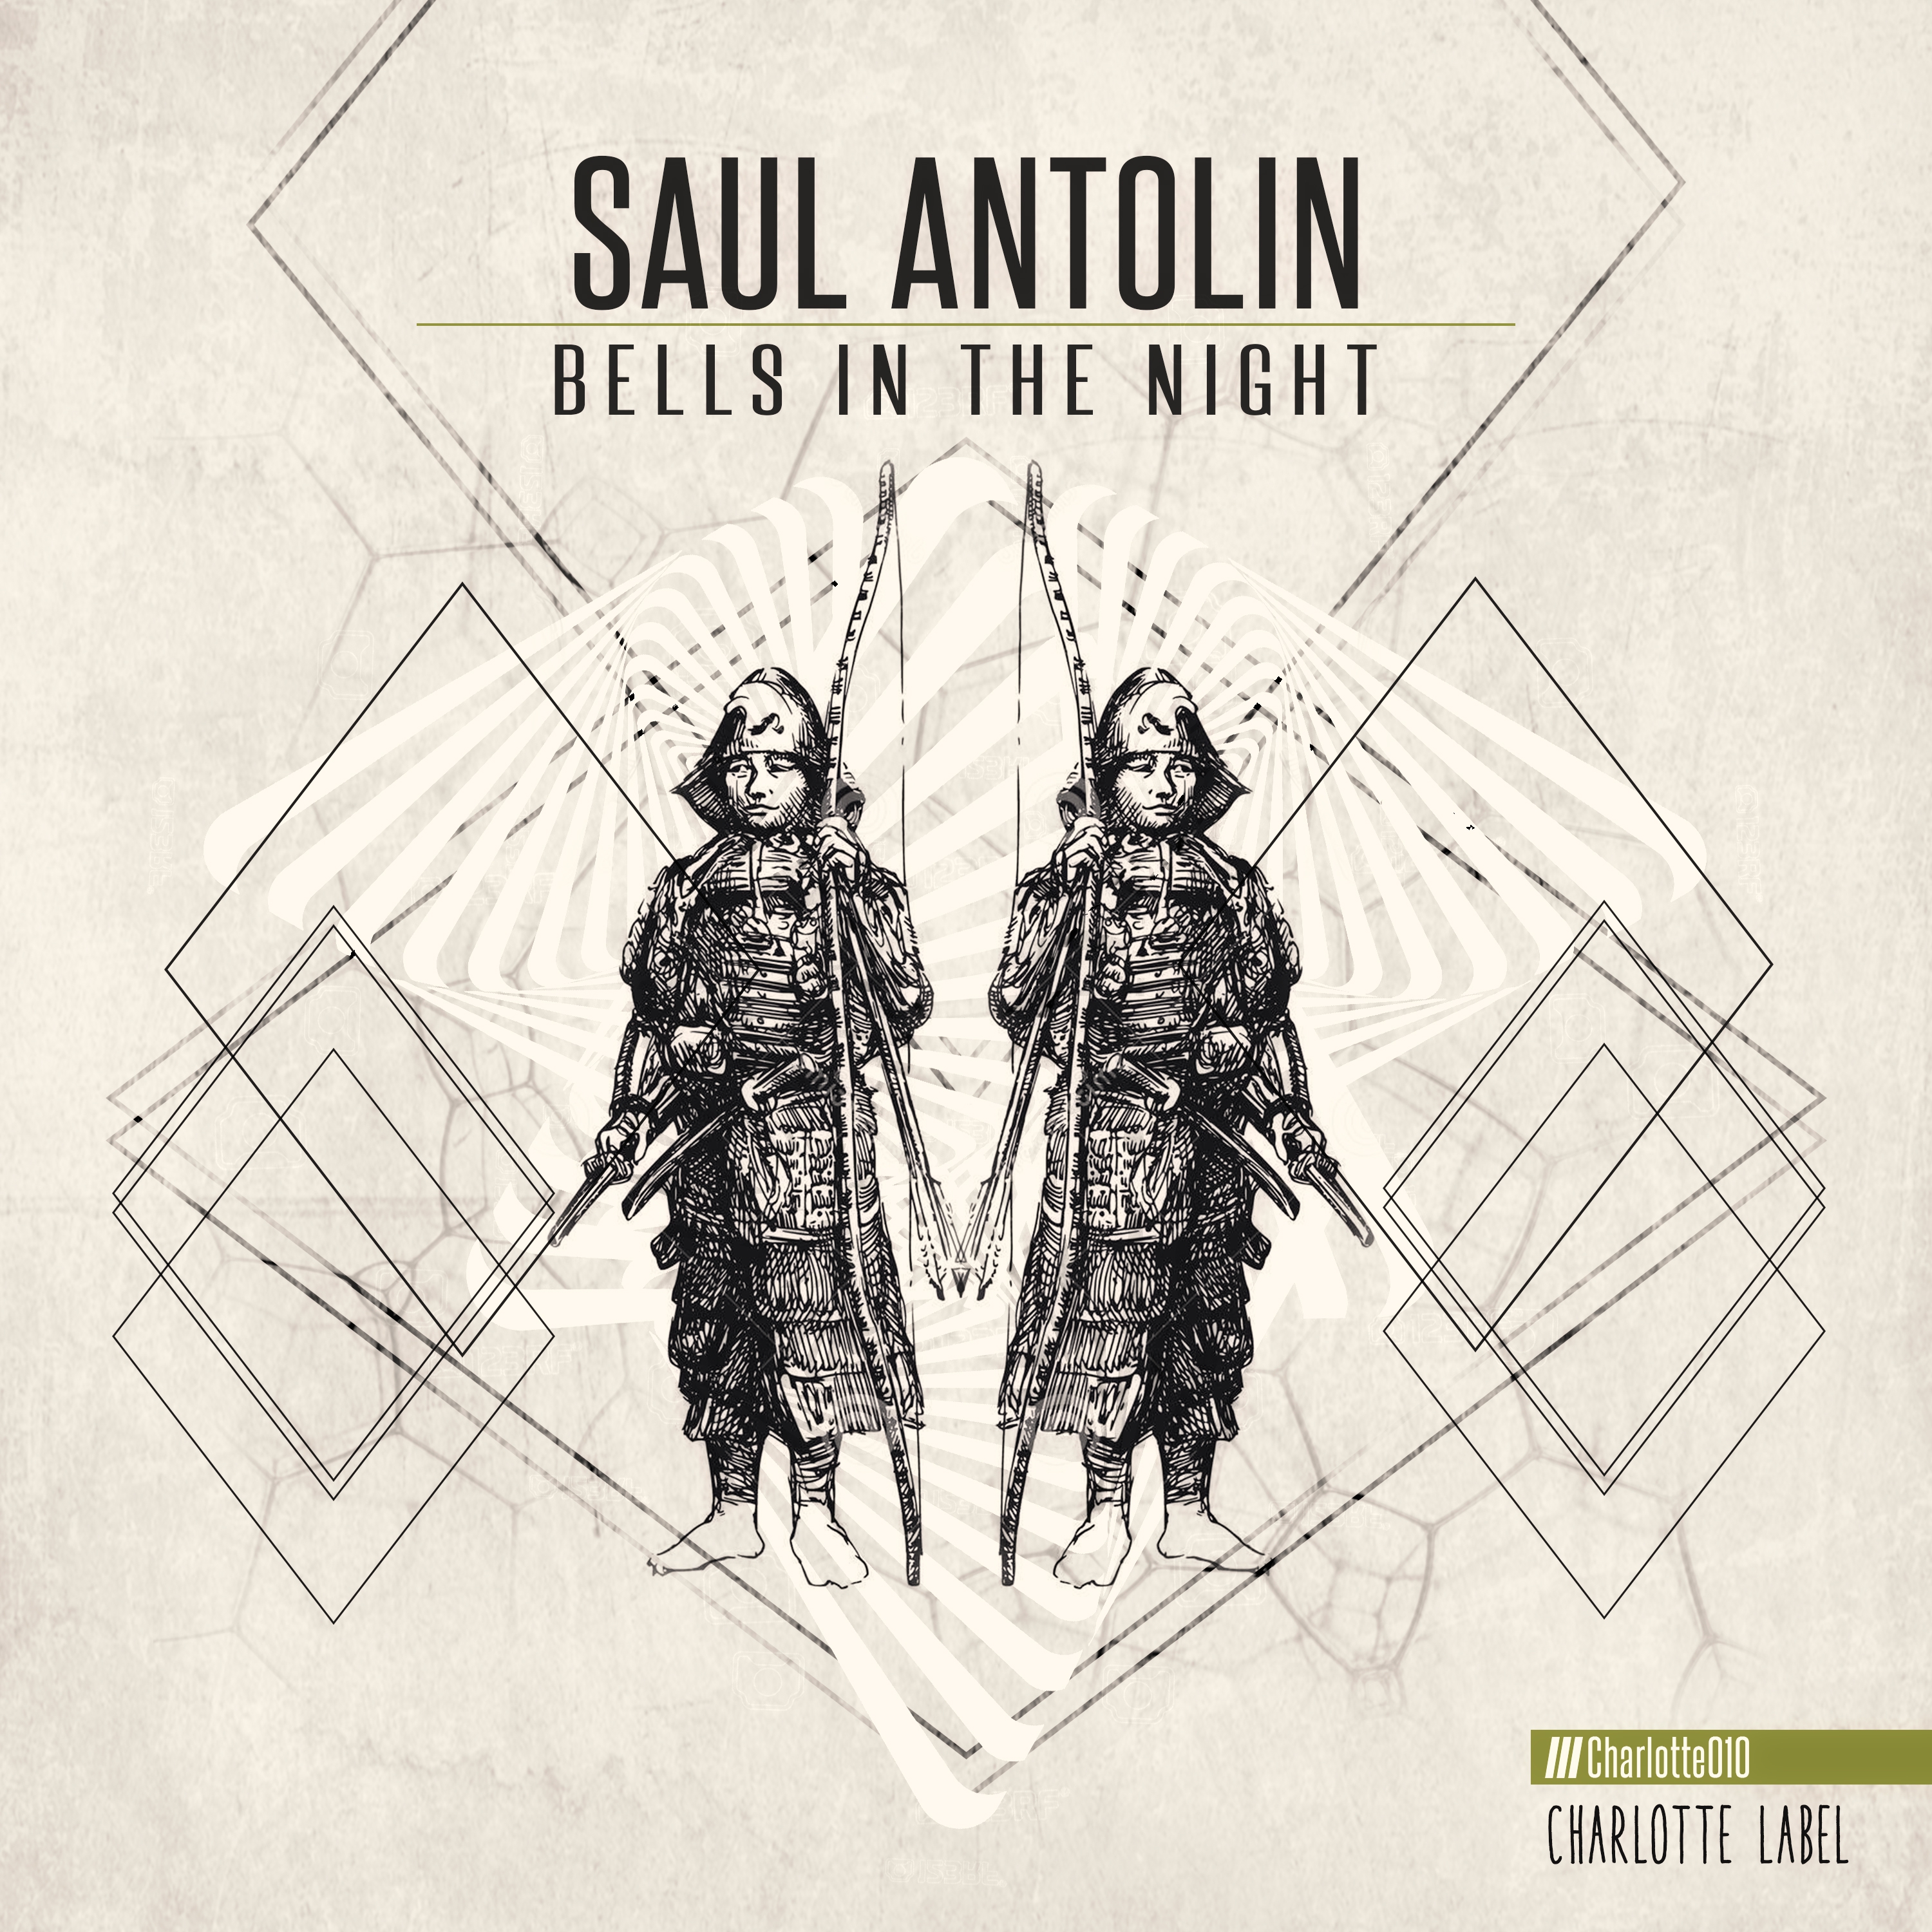 The Bells in the Night